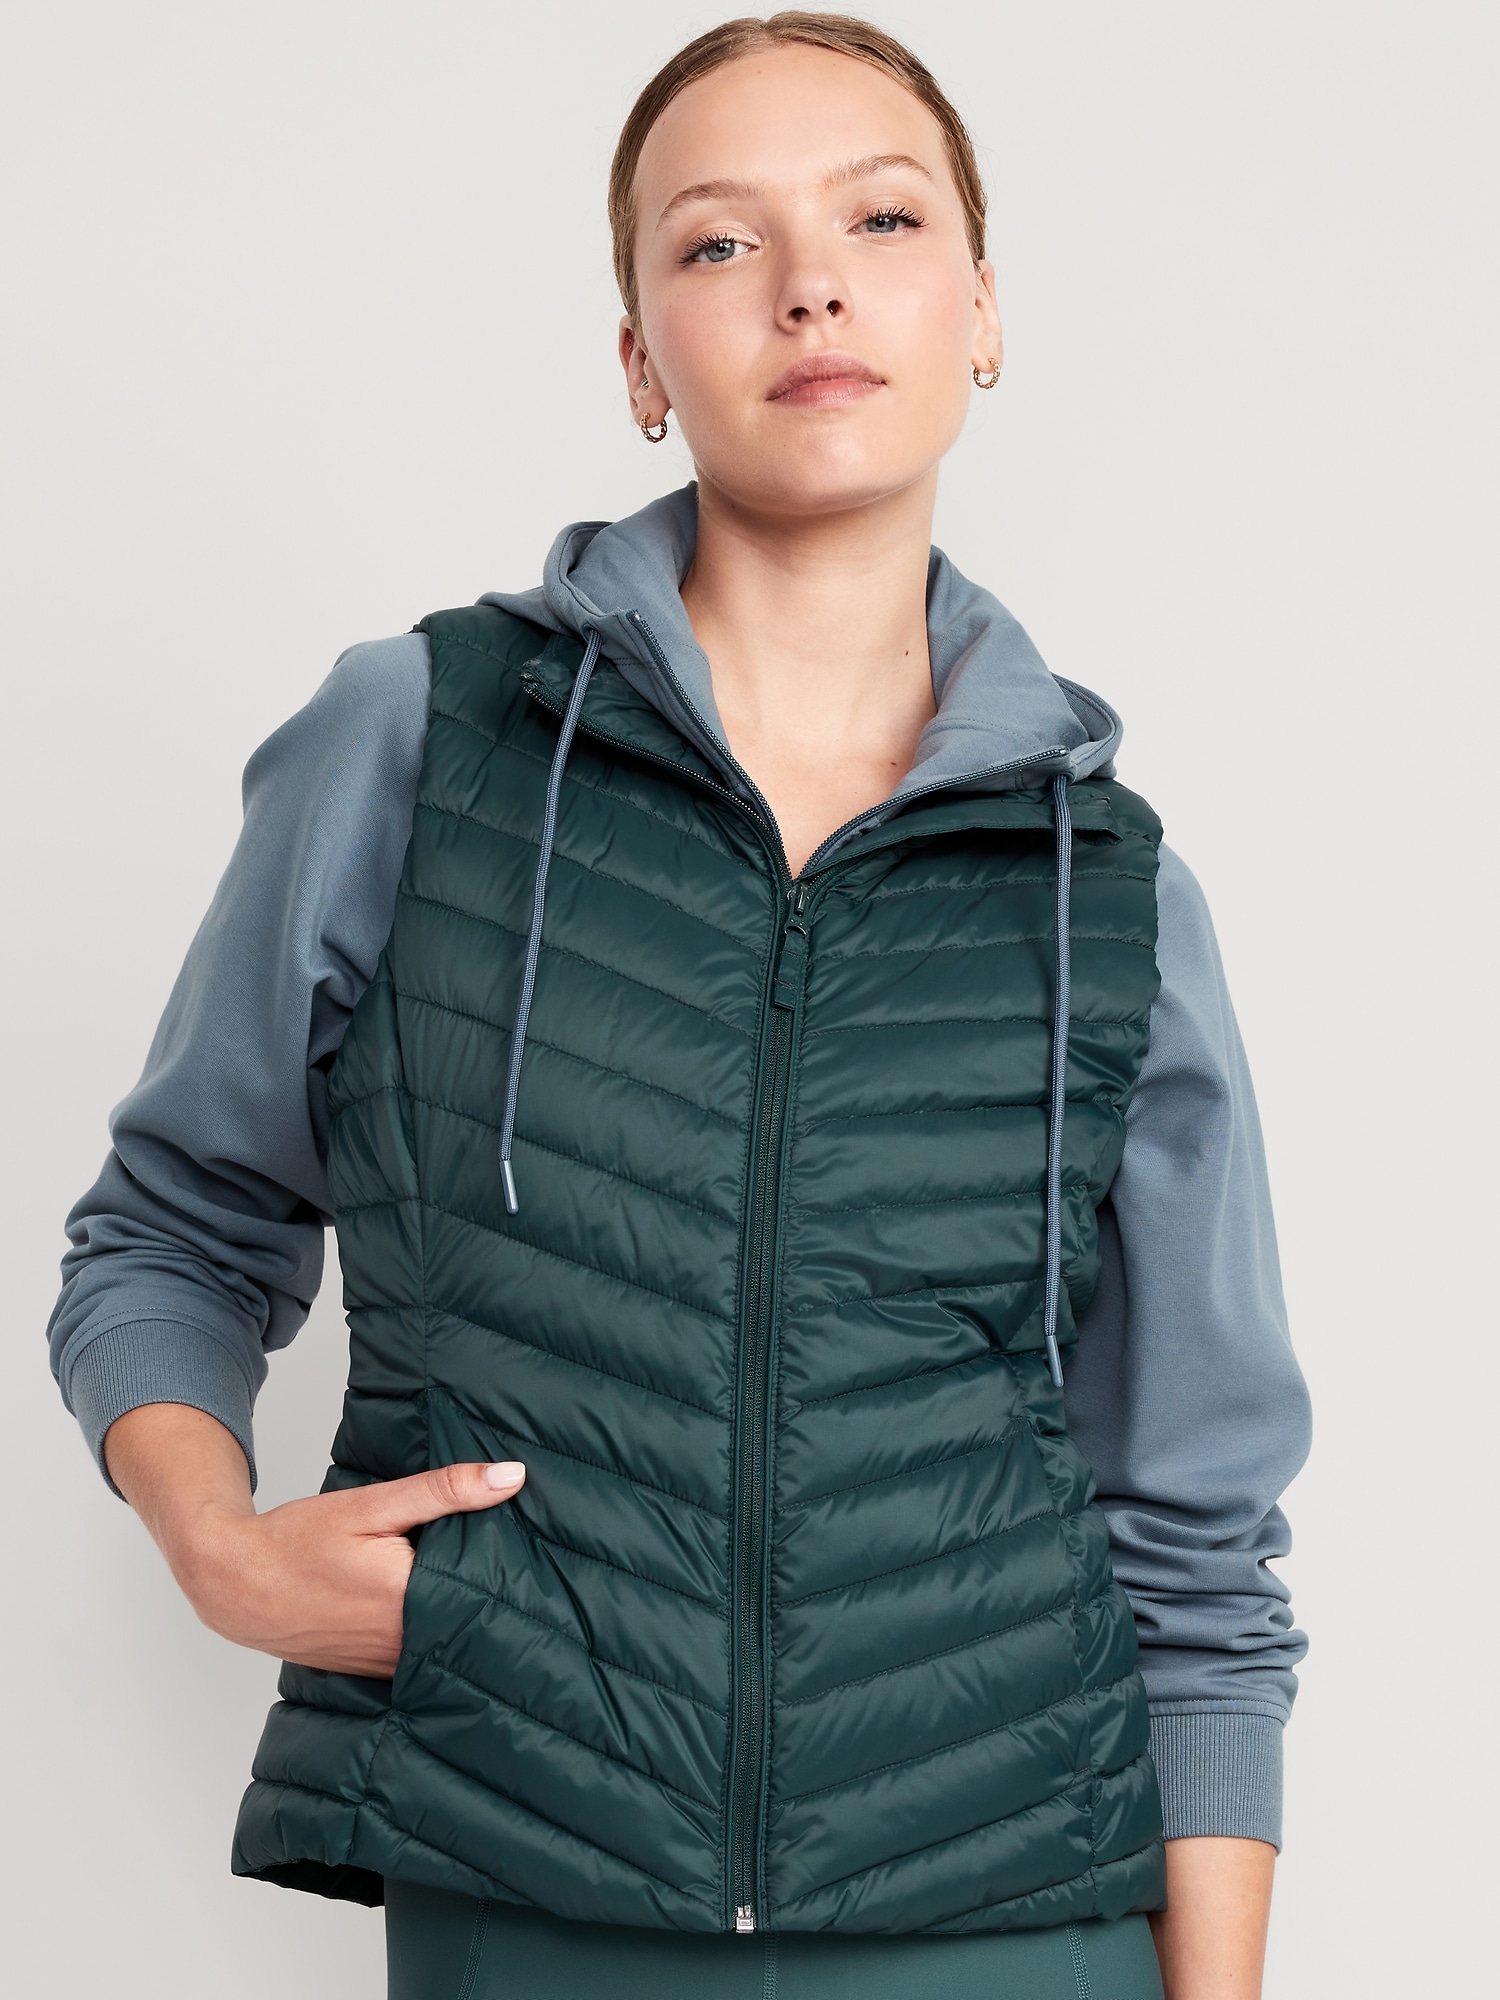 Narrow-Channel Quilted Puffer Vest for Women | Old Navy